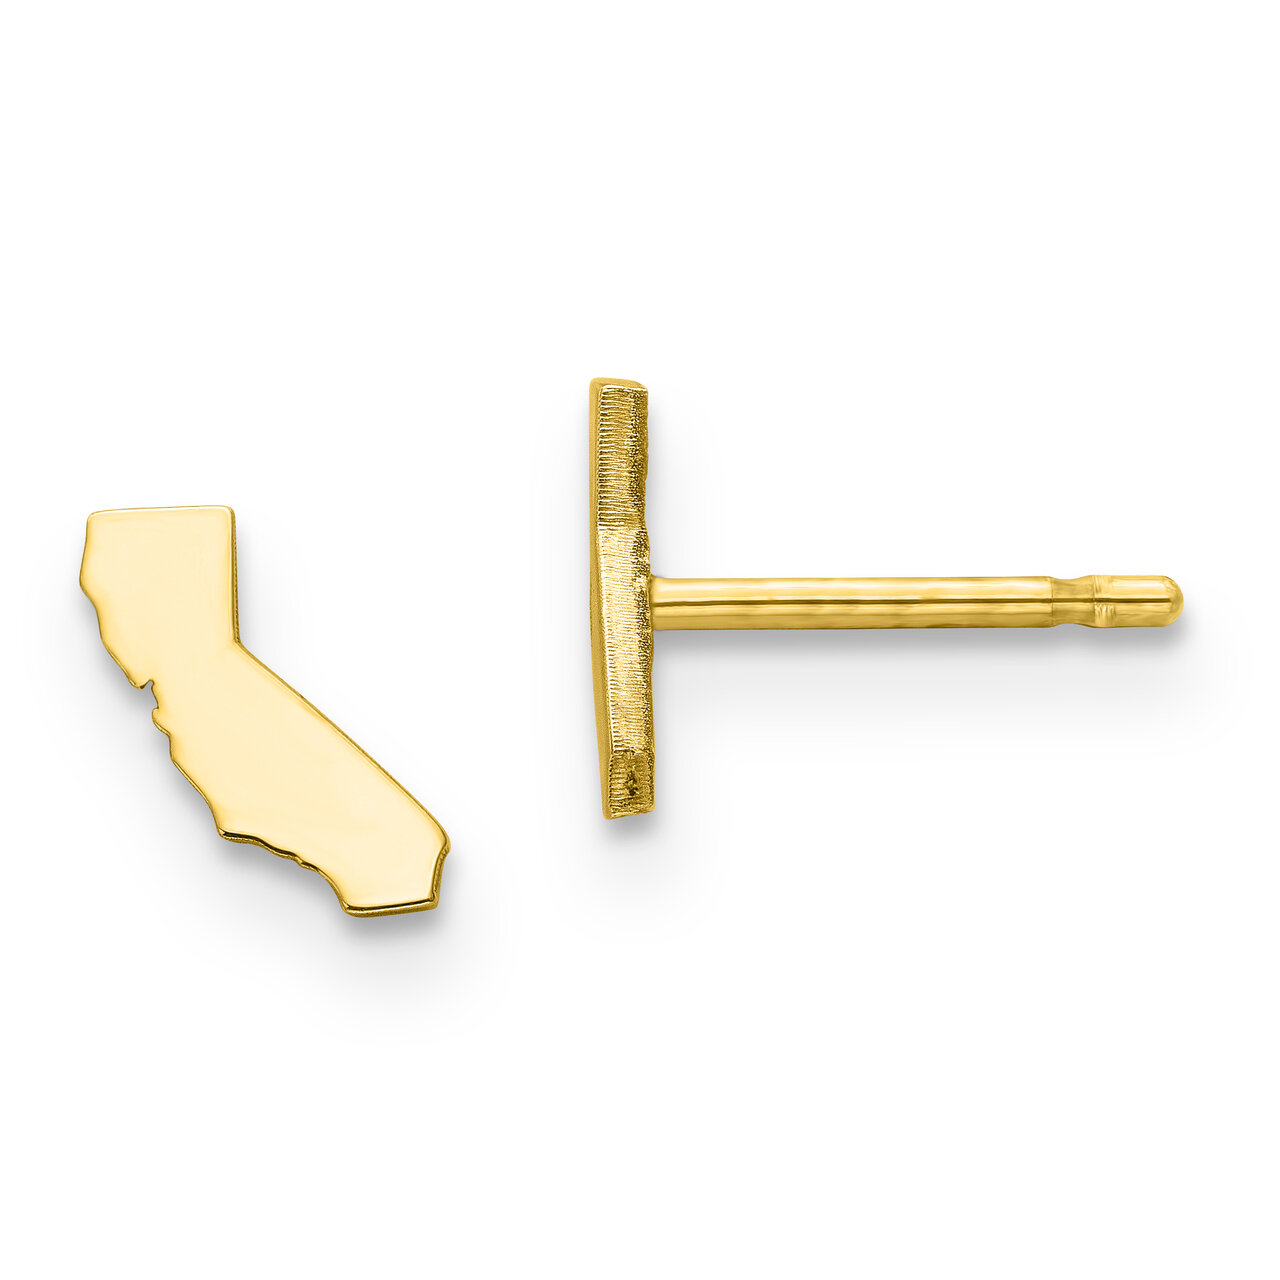 California State Small Earrings Gold-plated on Silver Engravable XNE50GP-CA